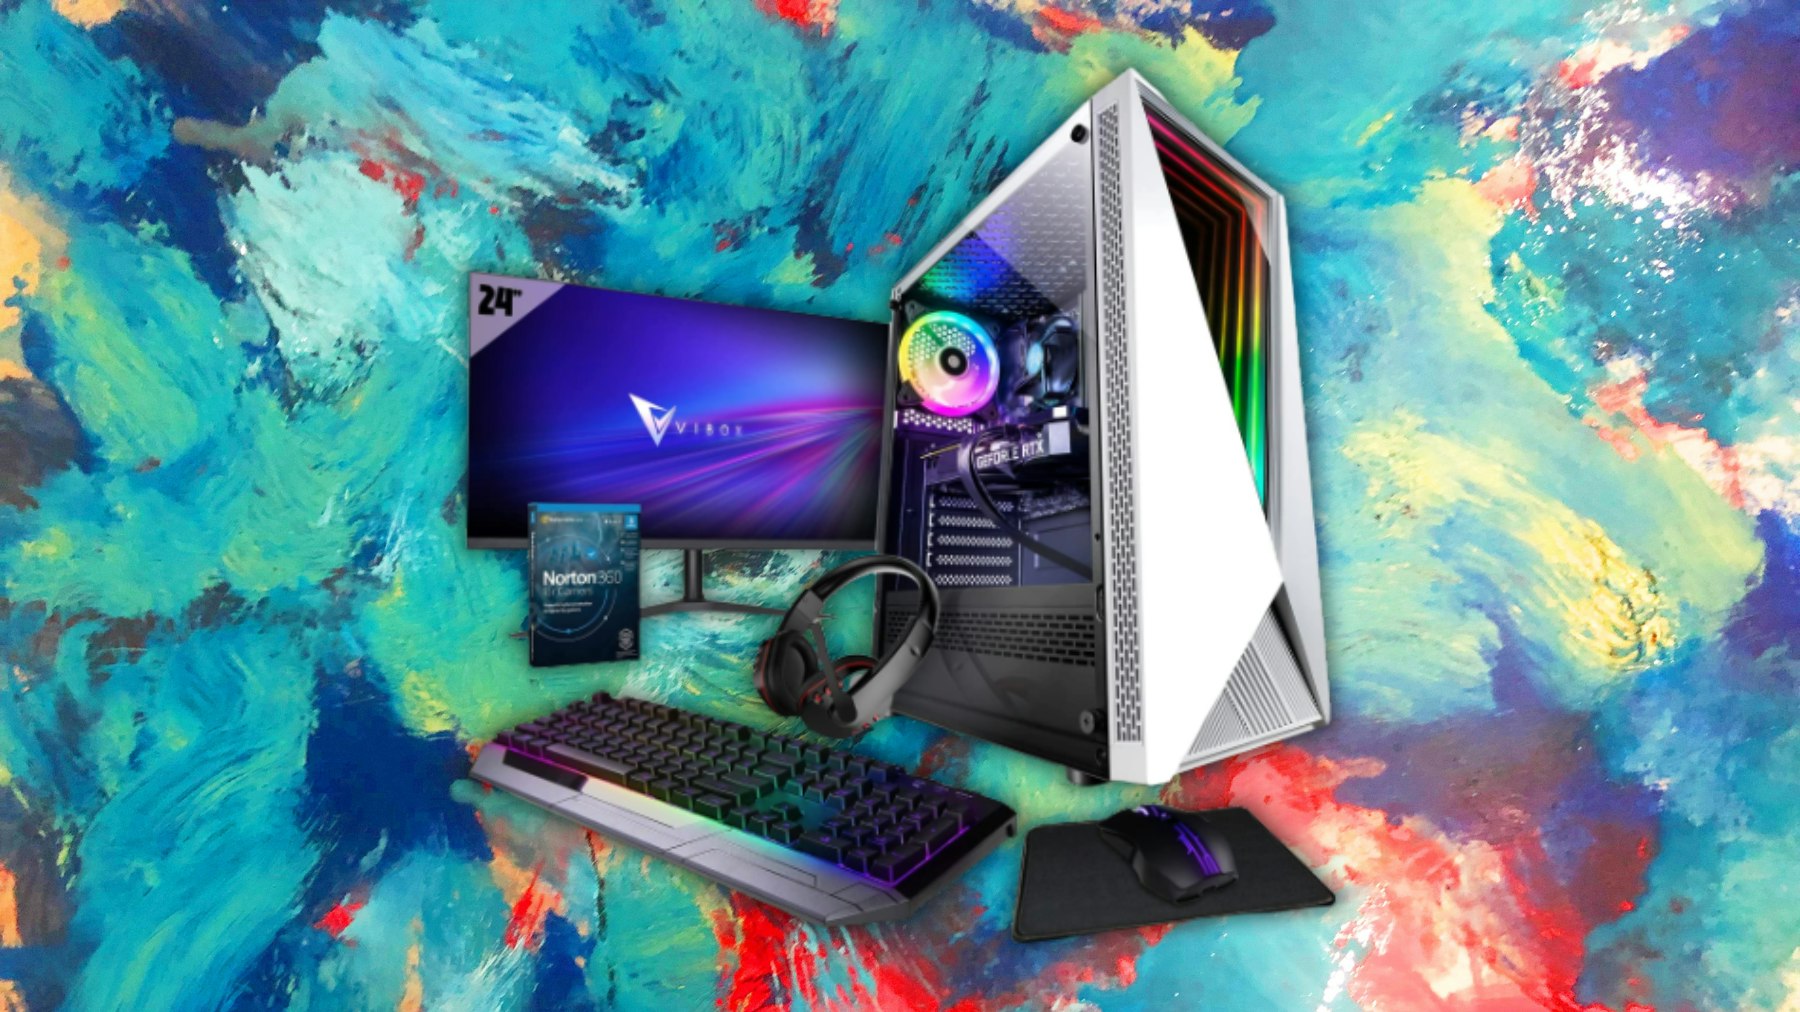 PCSPECIALIST - Powerful Gaming PCs - Custom Build your Gaming PC